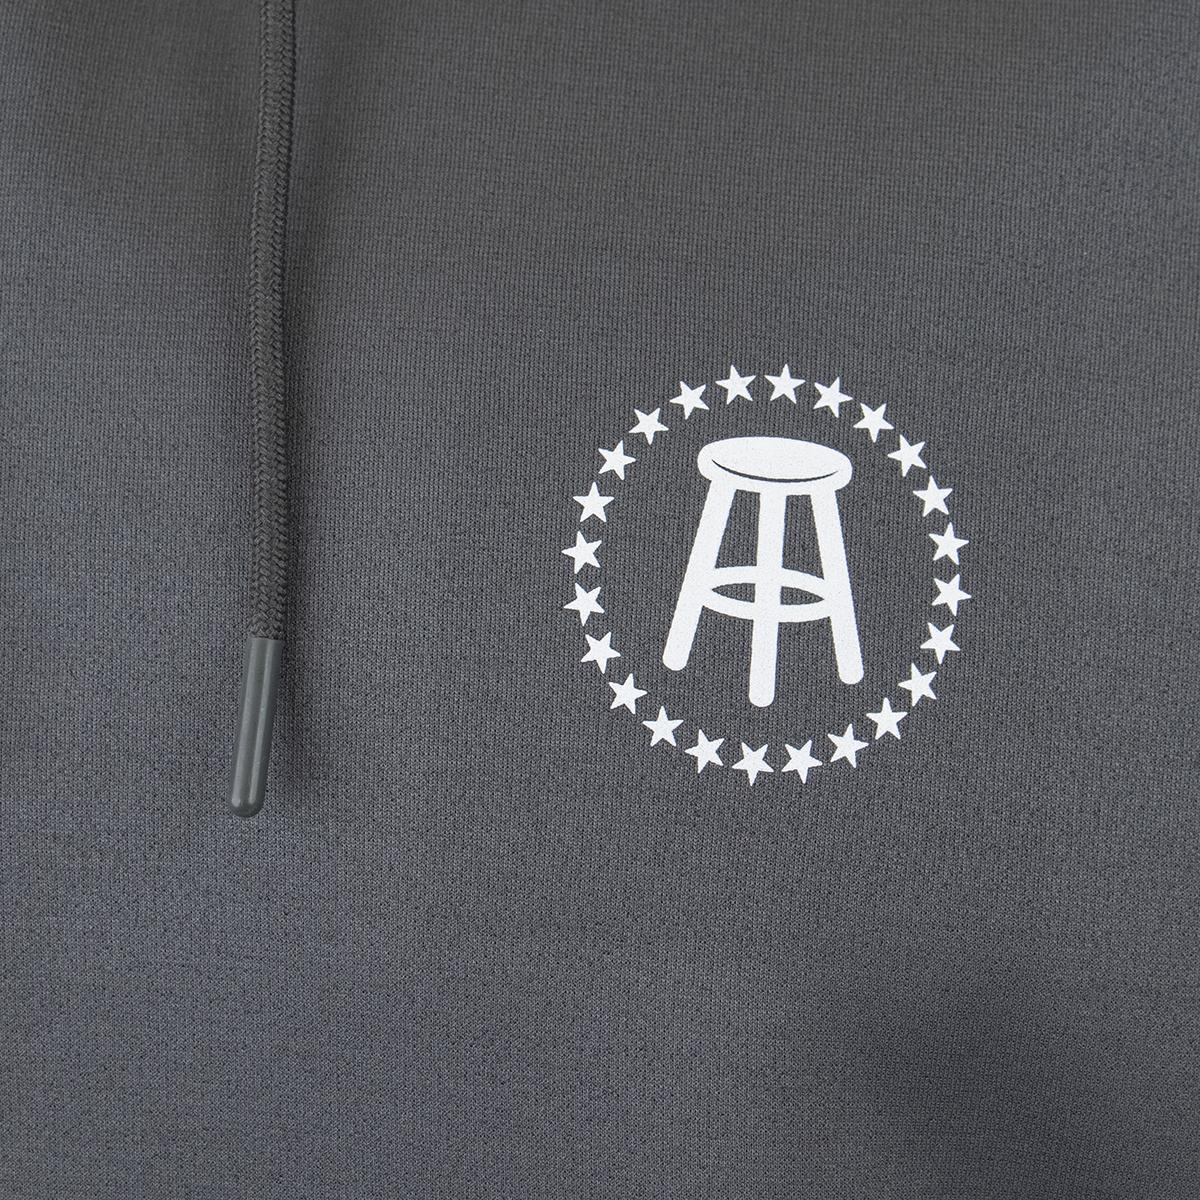 Barstool Sports Nike Therma Football Pullover Hoodie-Hoodies & Sweatshirts-Barstool Sports-Barstool Sports